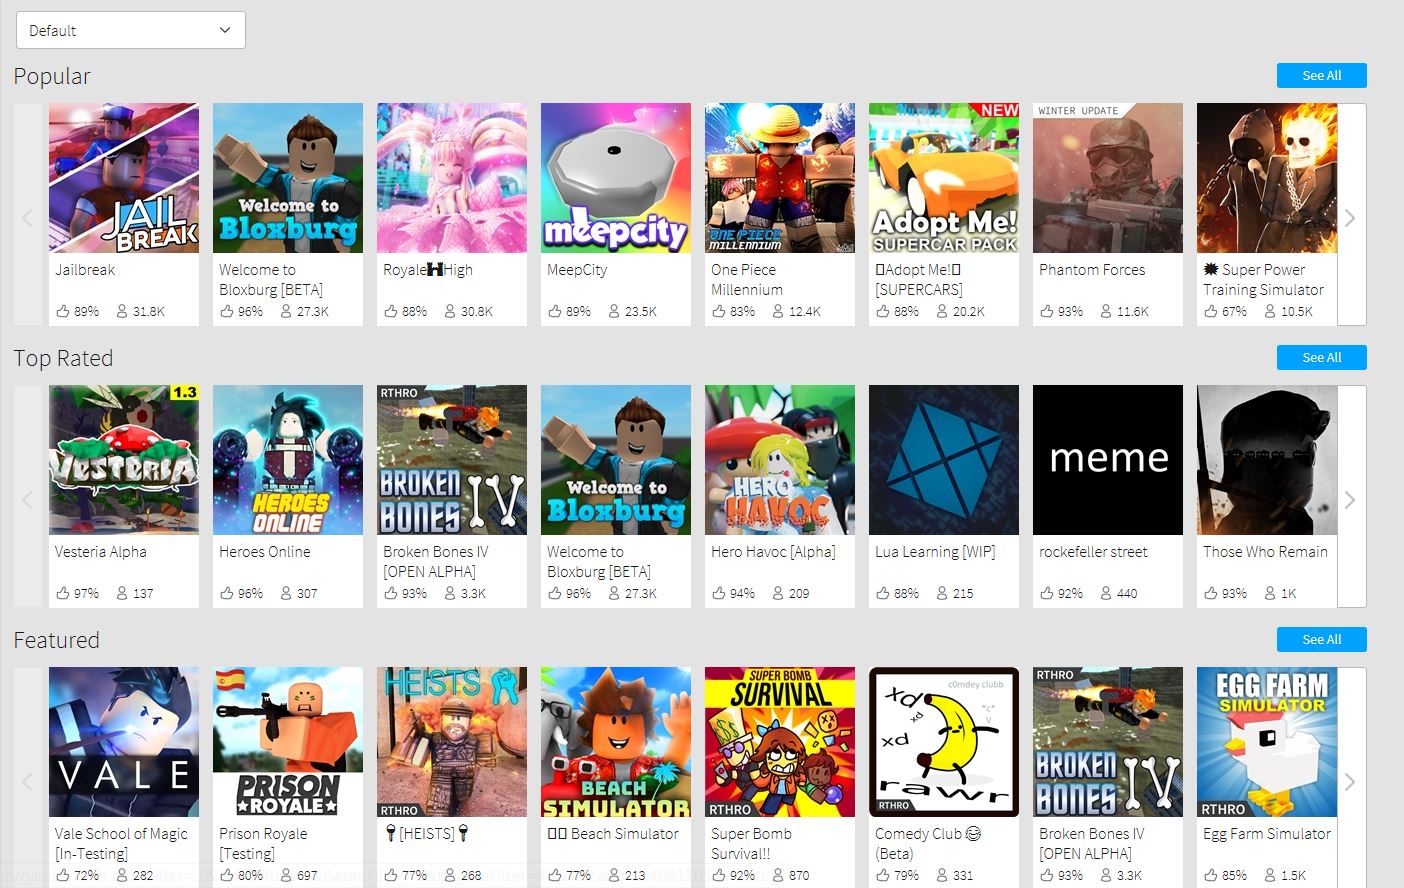 Front Page Roblox Wikia Fandom Powered By Wikia - frontpage20190126